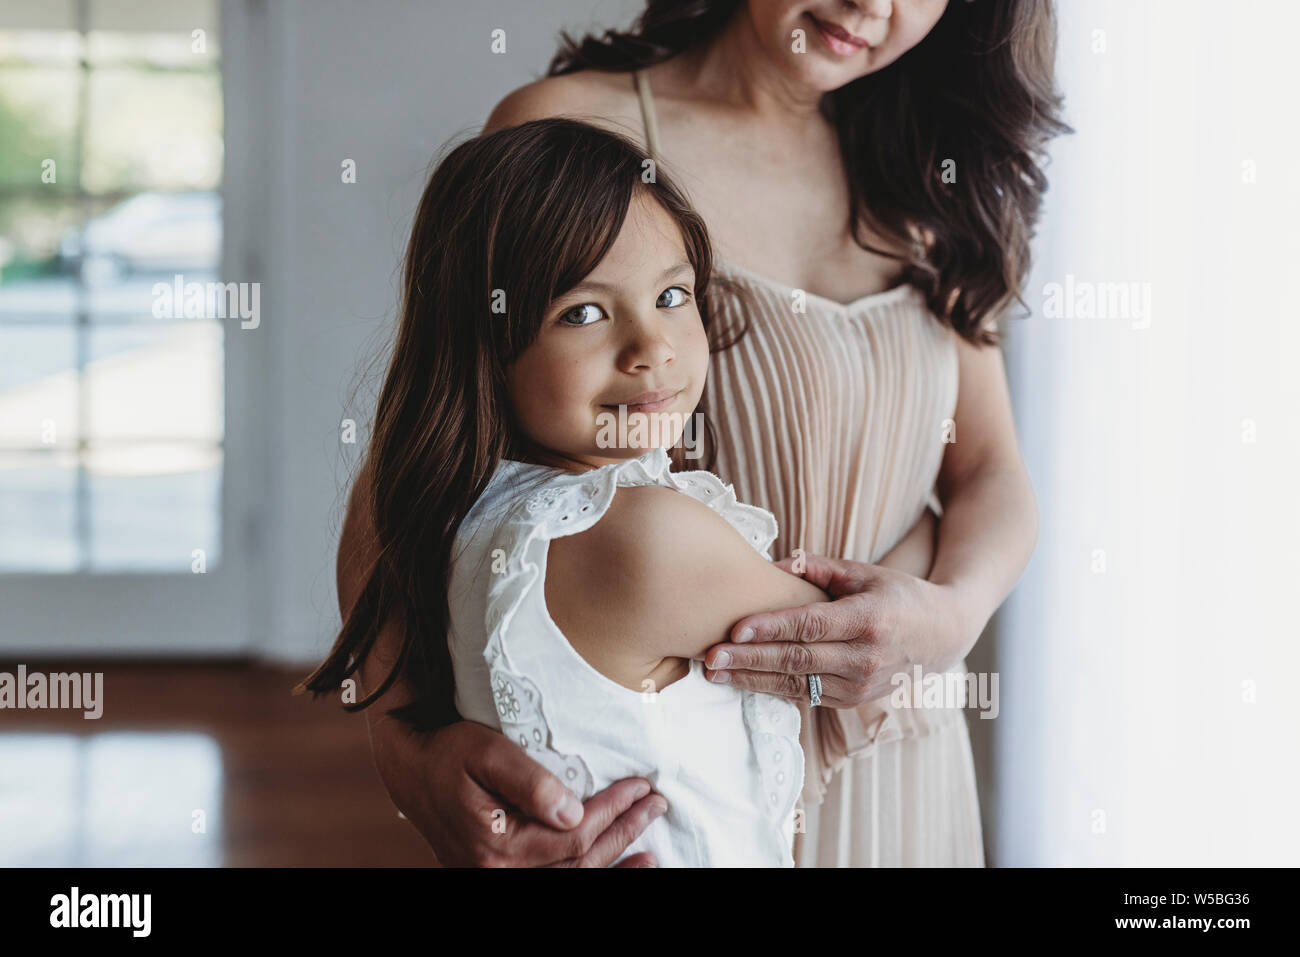 Mid level view of school aged girl being hugged by mother Stock Photo